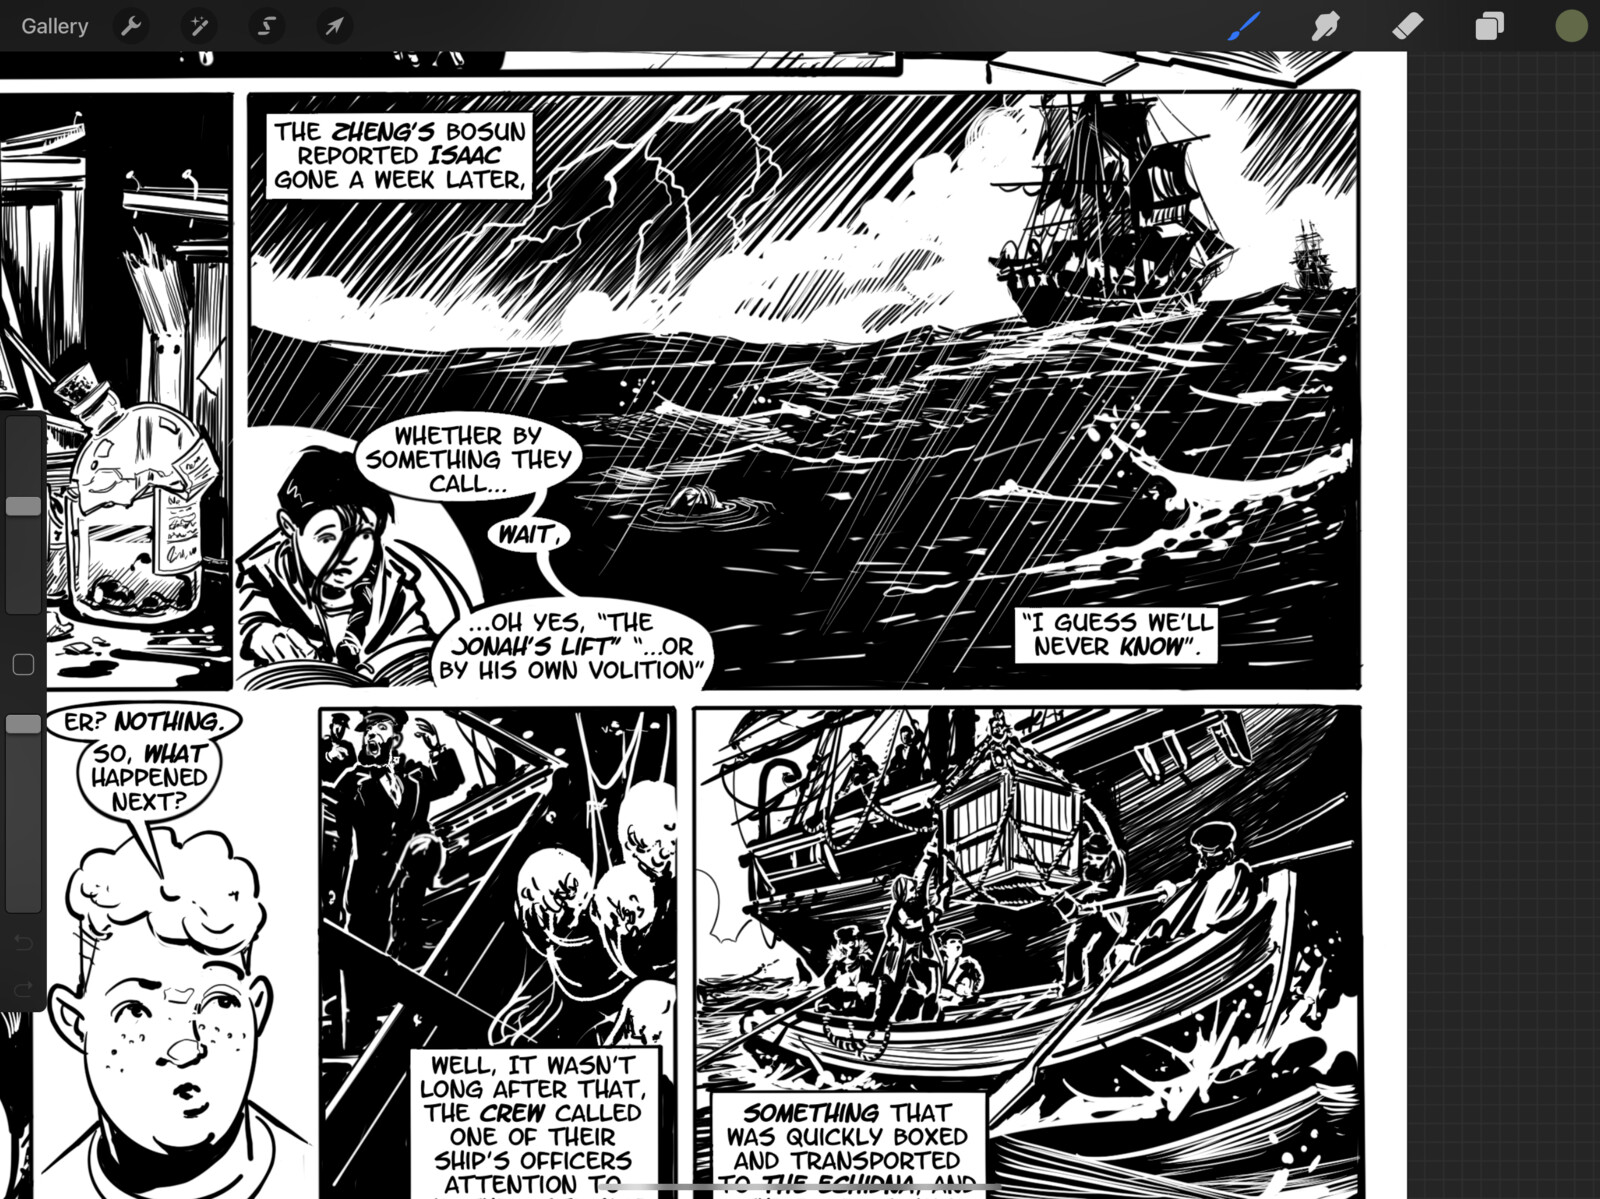 This page shows the mixture of classic illustration style for the storytelling of the main character, whilst a more “cartoonish” stylised approach for those main characters.